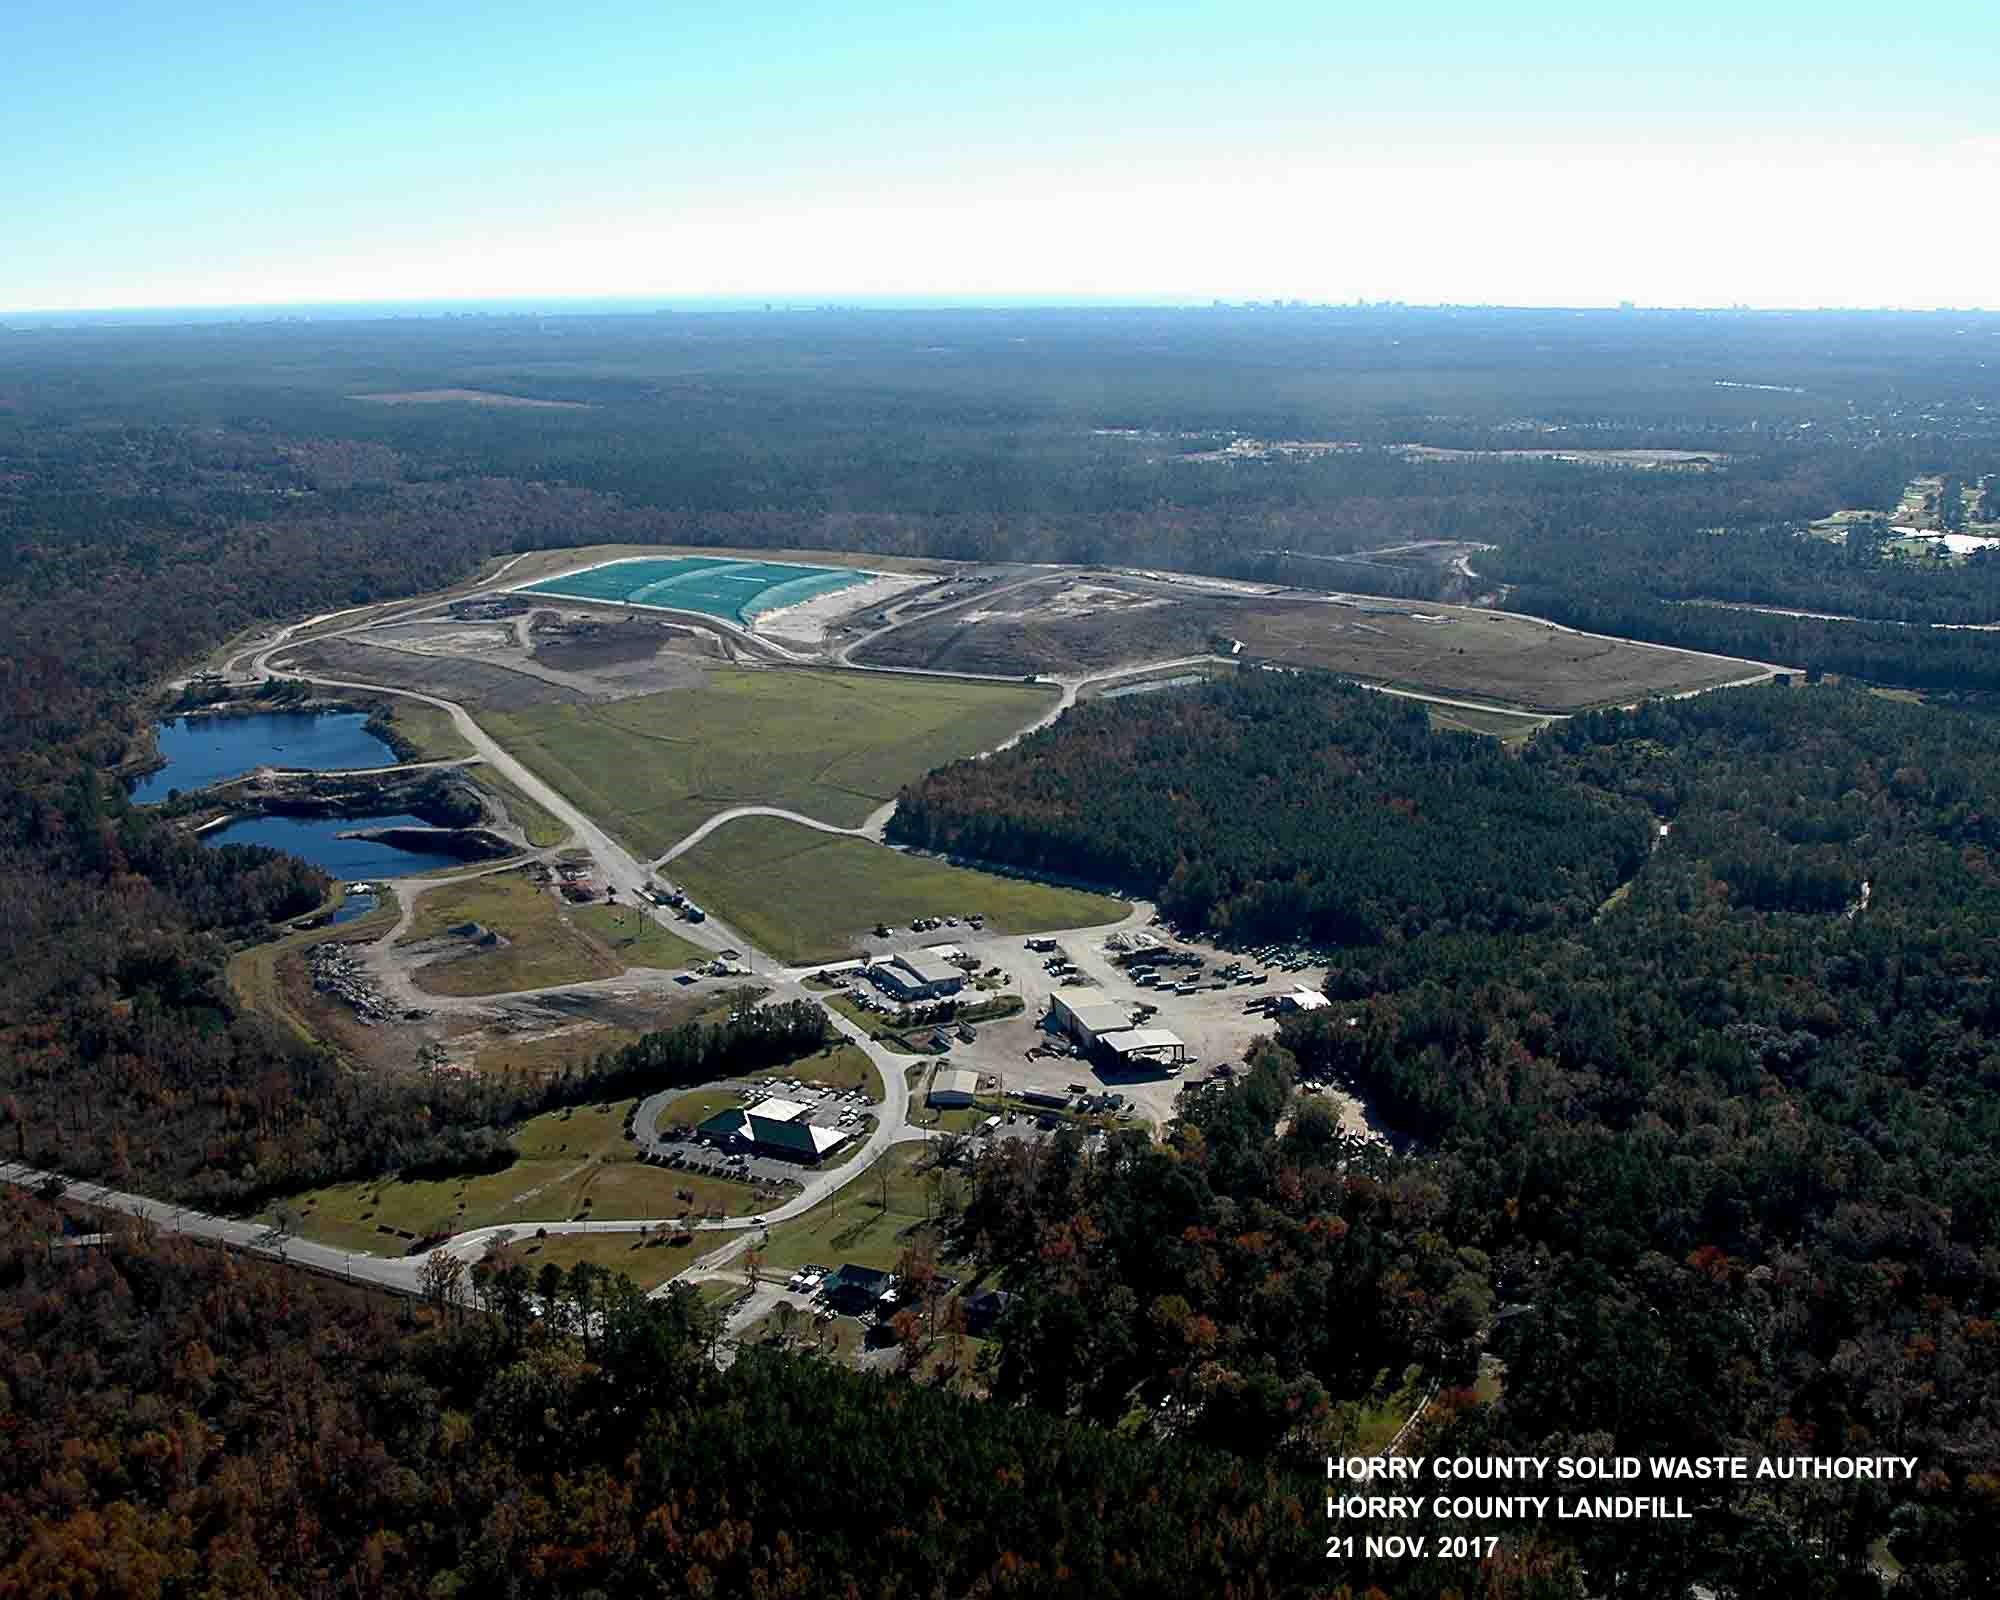 Horry County Solid Waste Authority Aerial View